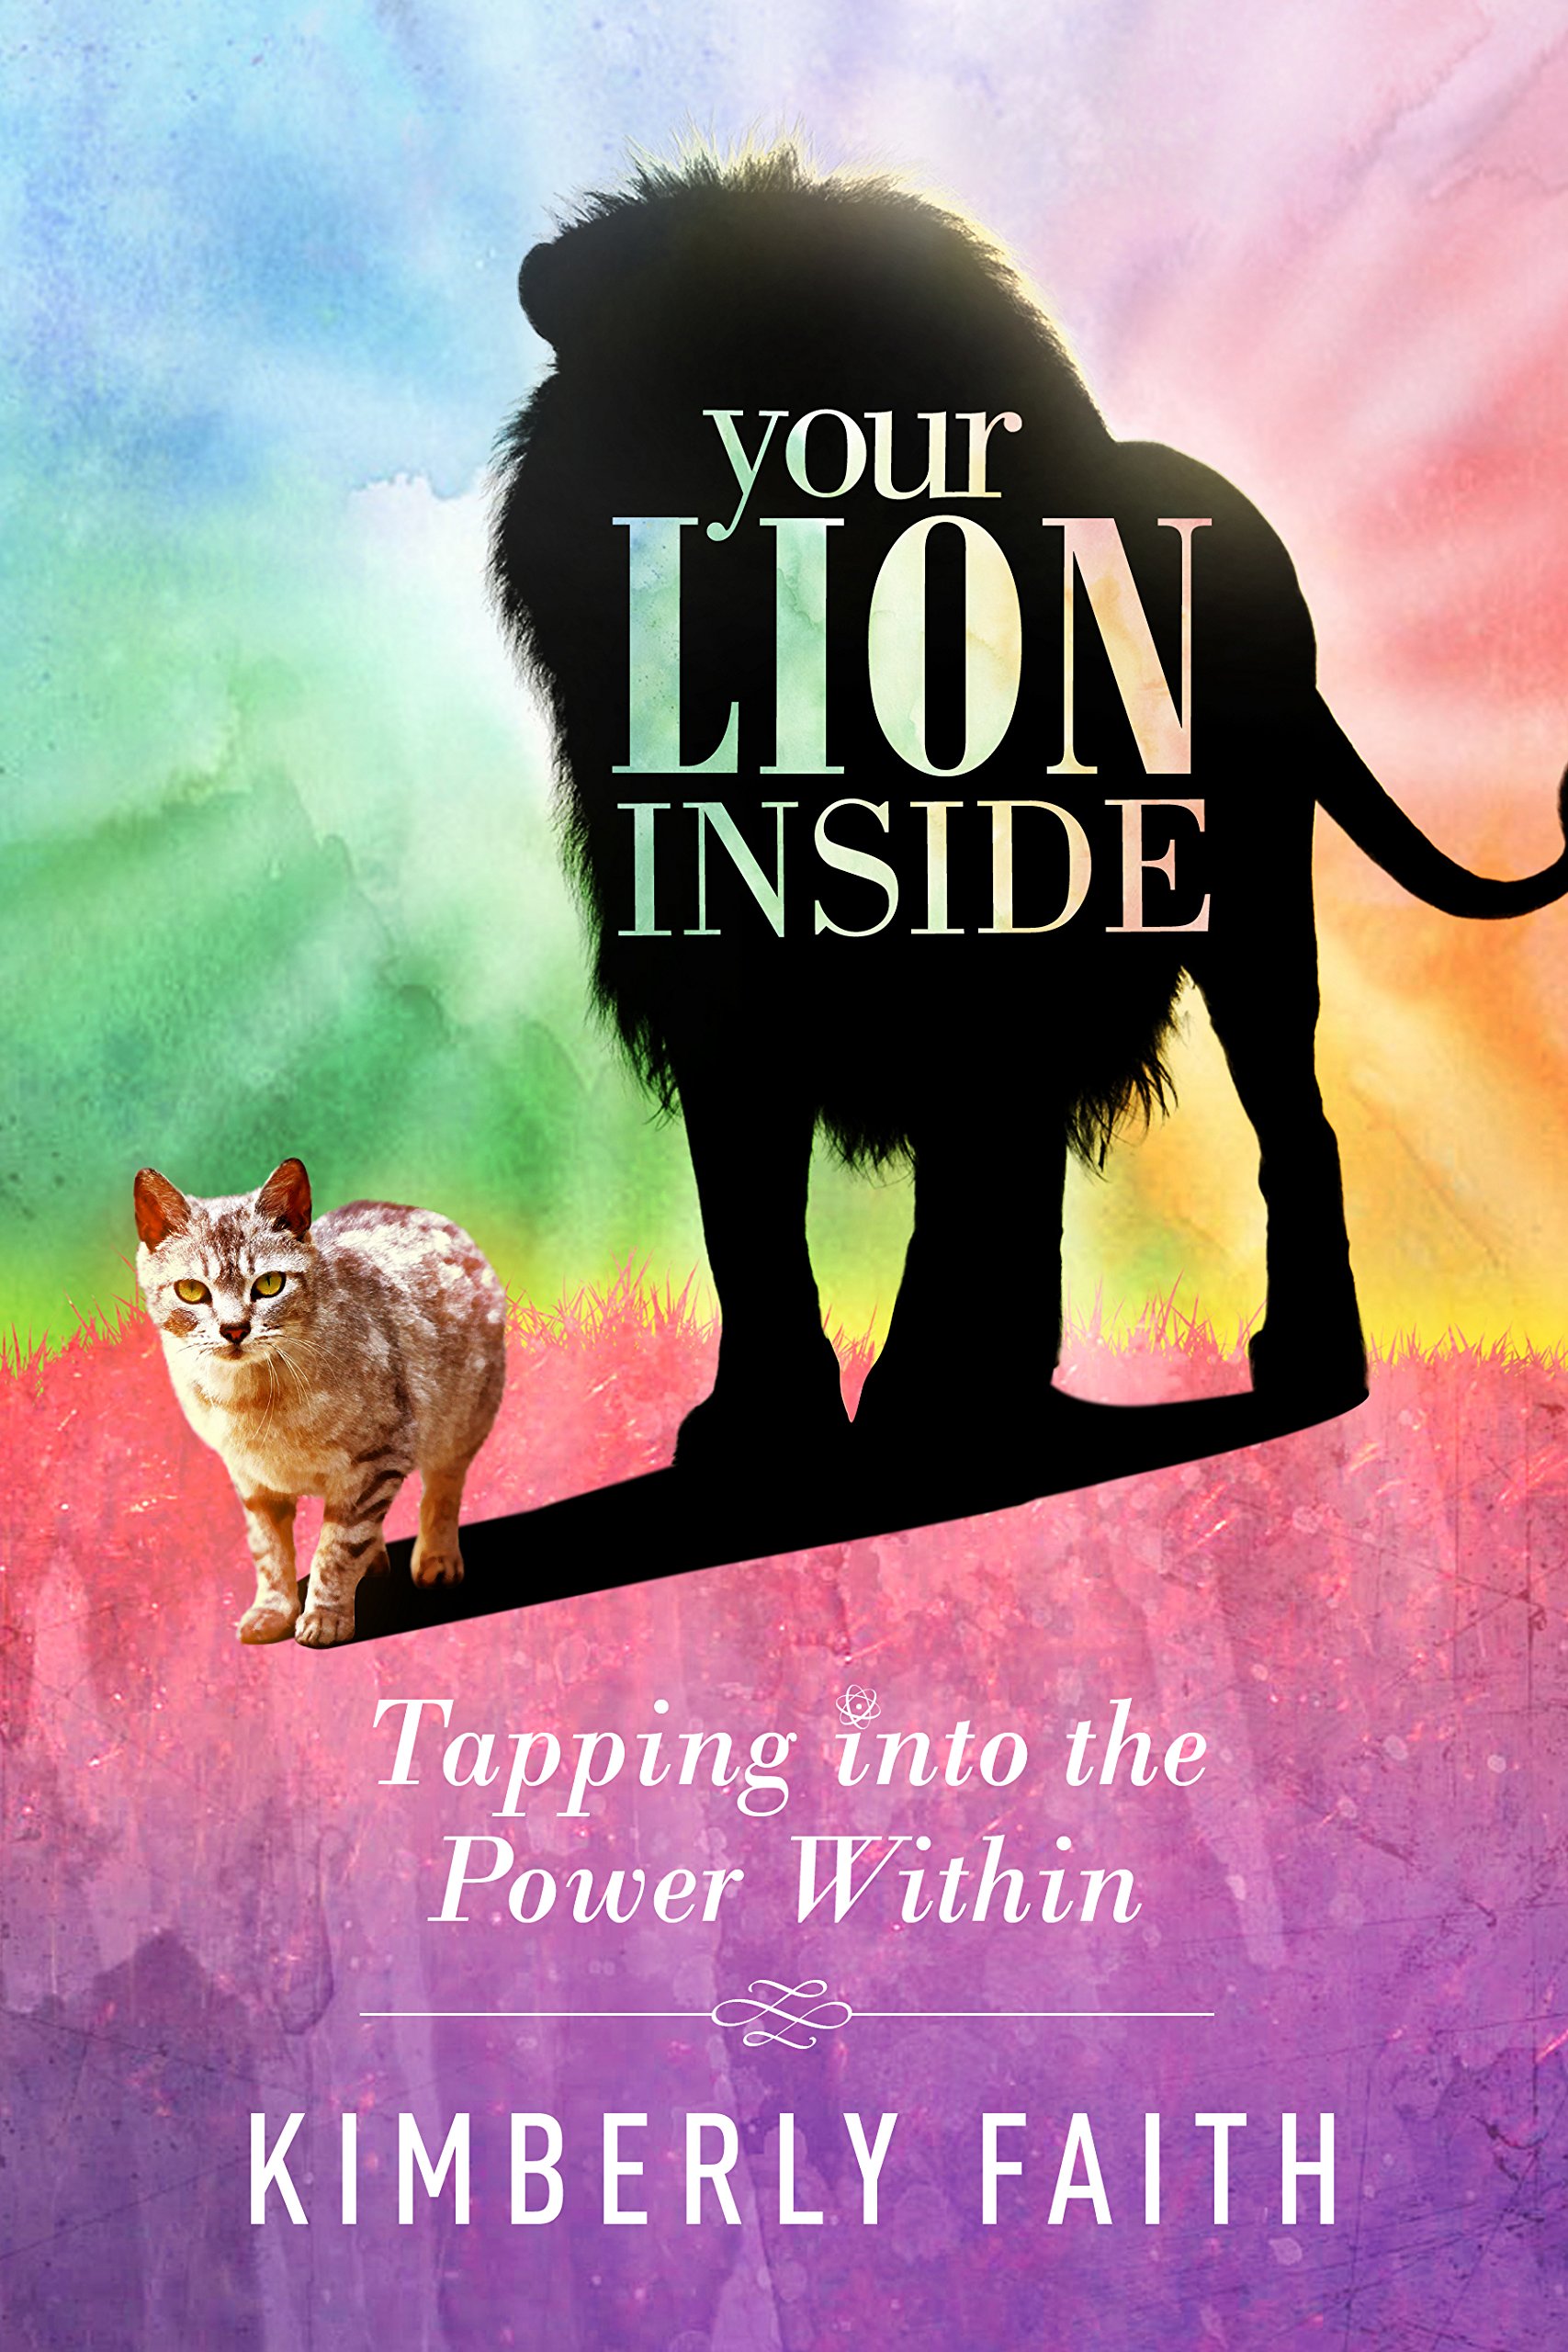 Your Lion Inside Tapping Into the Power Within